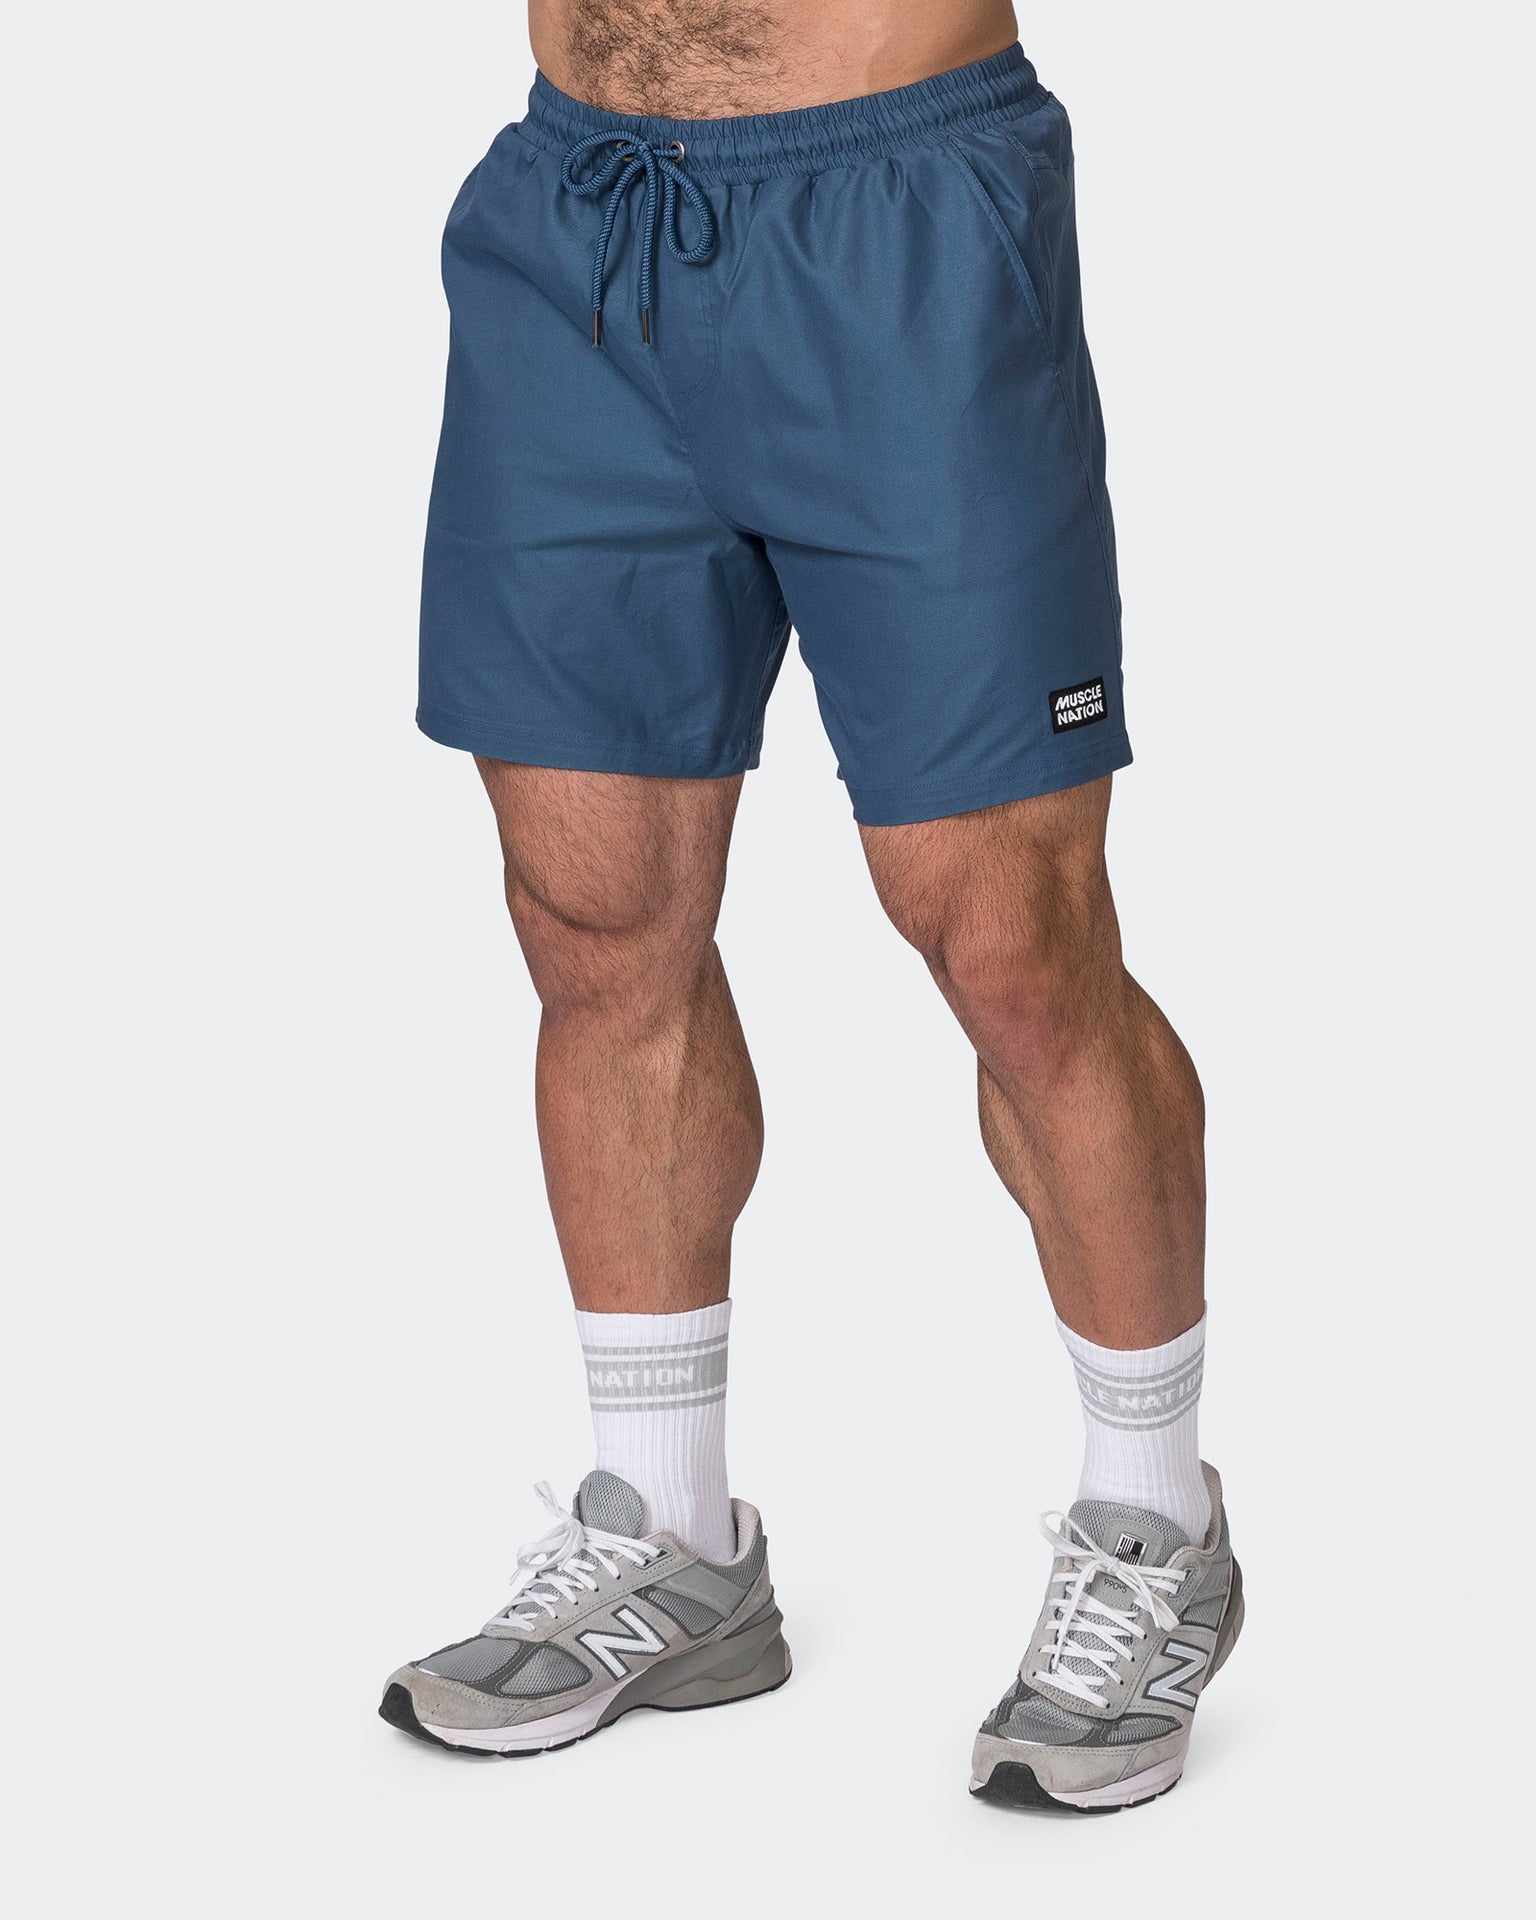 Muscle Nation Shorts Daily 6" Shorts - Bluesteel